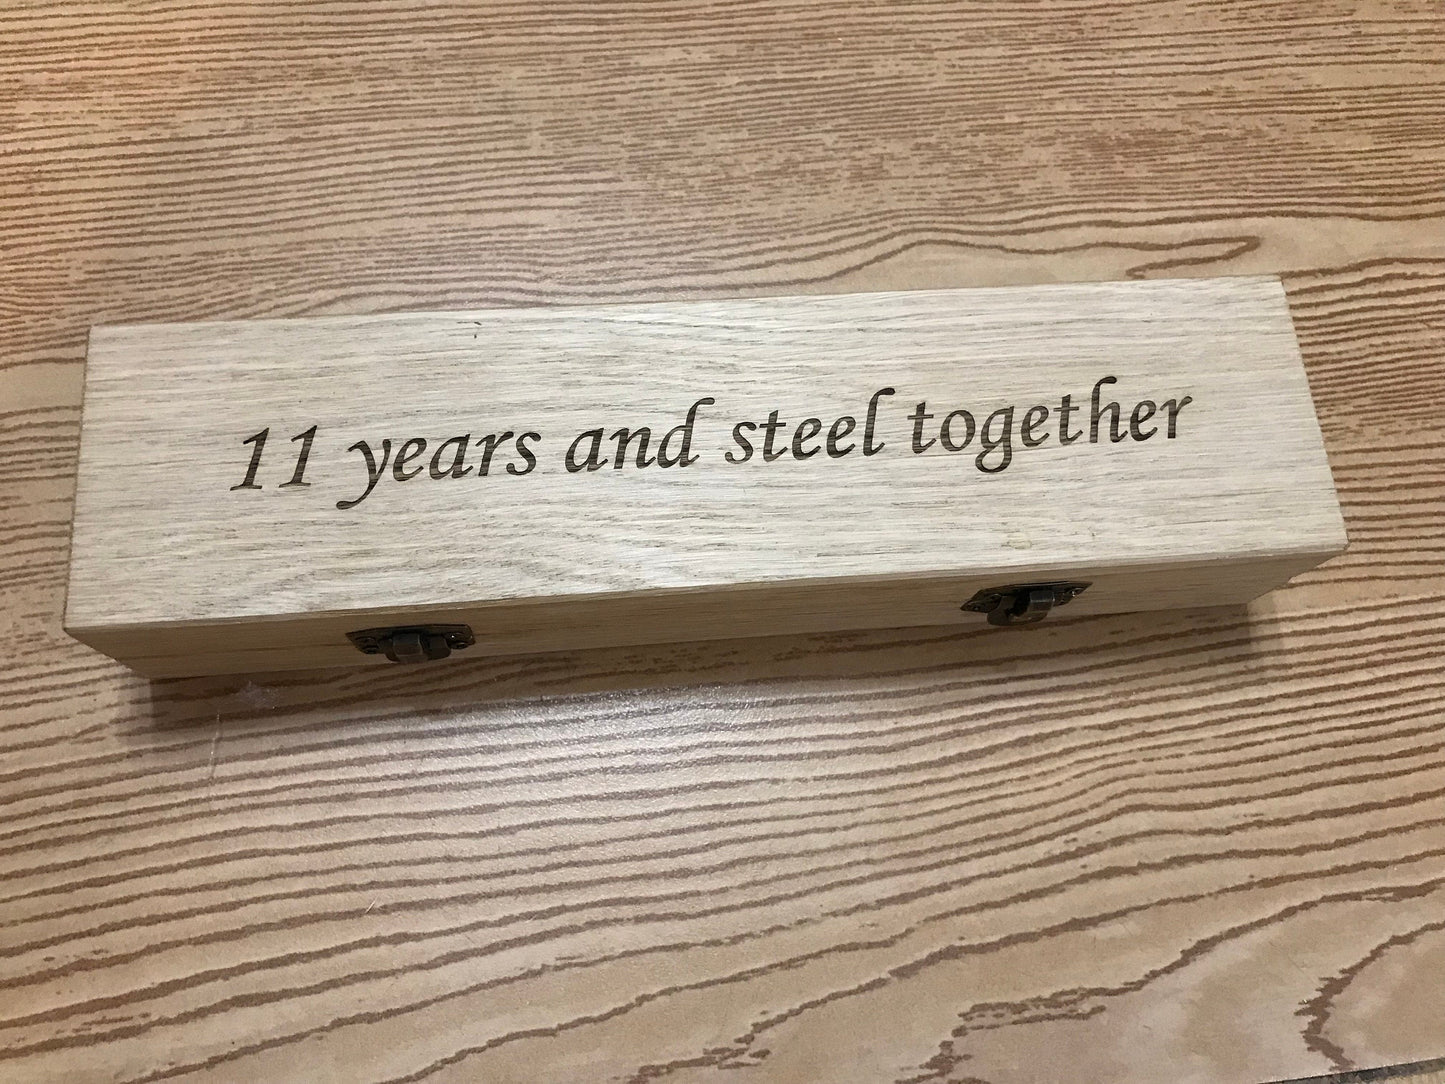 11th anniversary, steel anniversary, steel gift for him, engraved steel gift, railroad spike knife, eleventh anniversary,steel gifts for men